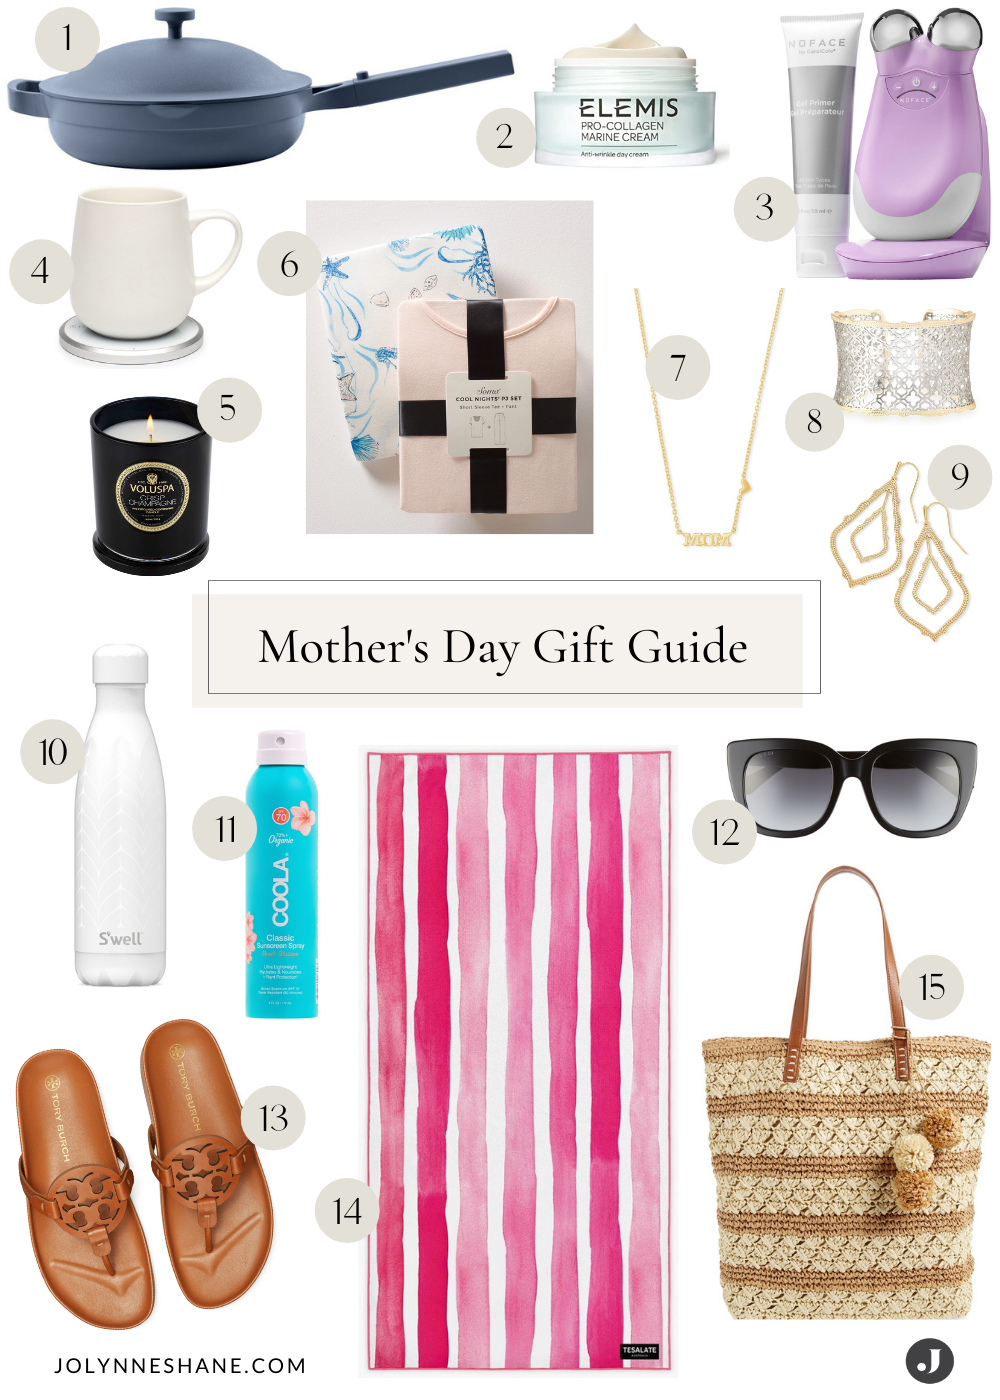 https://jolynneshane.com/wp-content/uploads/2021/04/Mothers-Day-Gift-Guide-2021-1.png